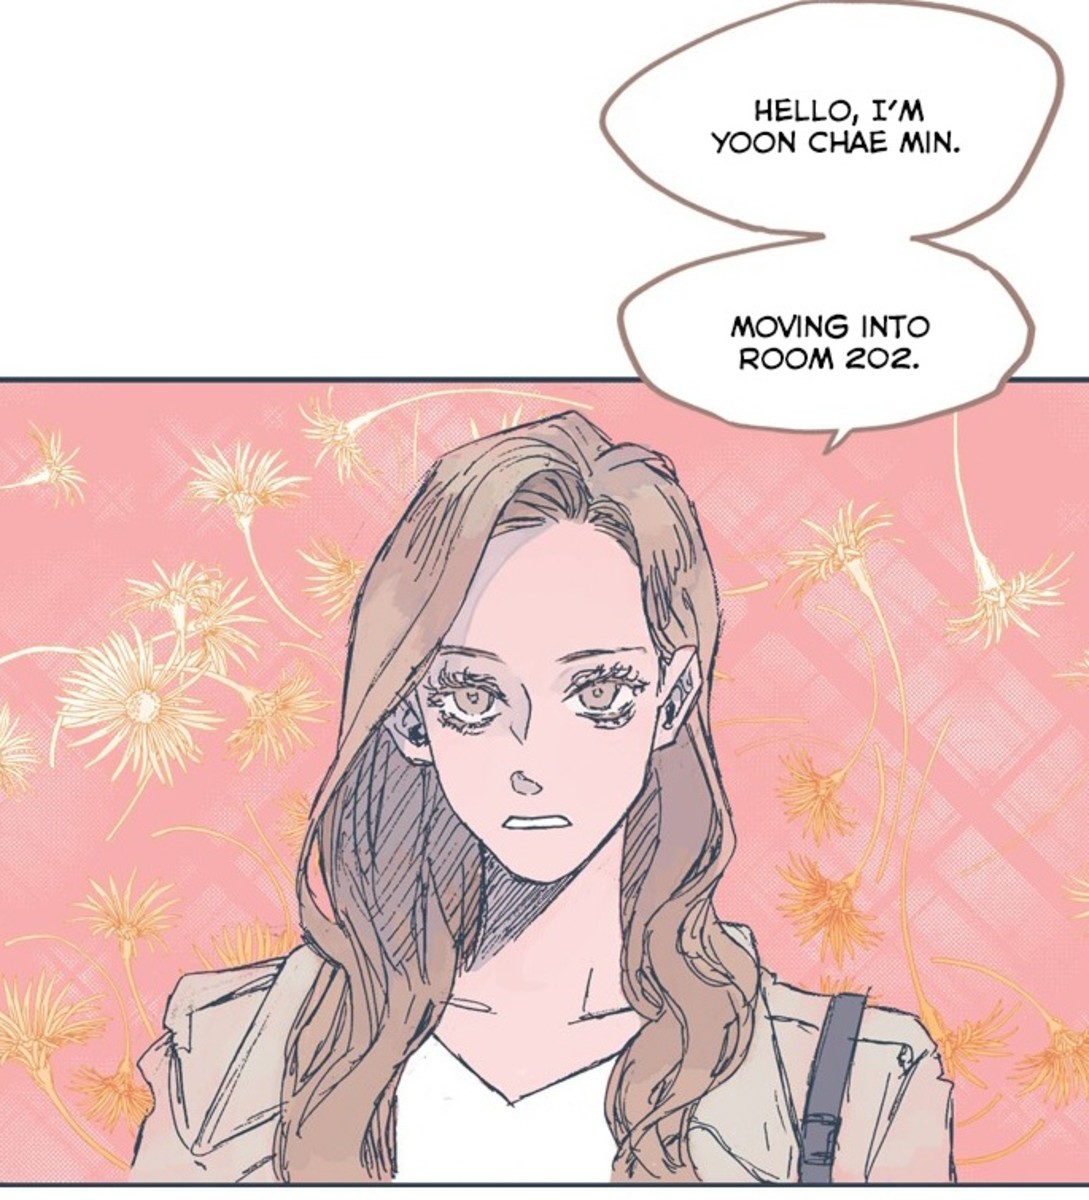 Yoon Chae Min's first appearance in the manhwa